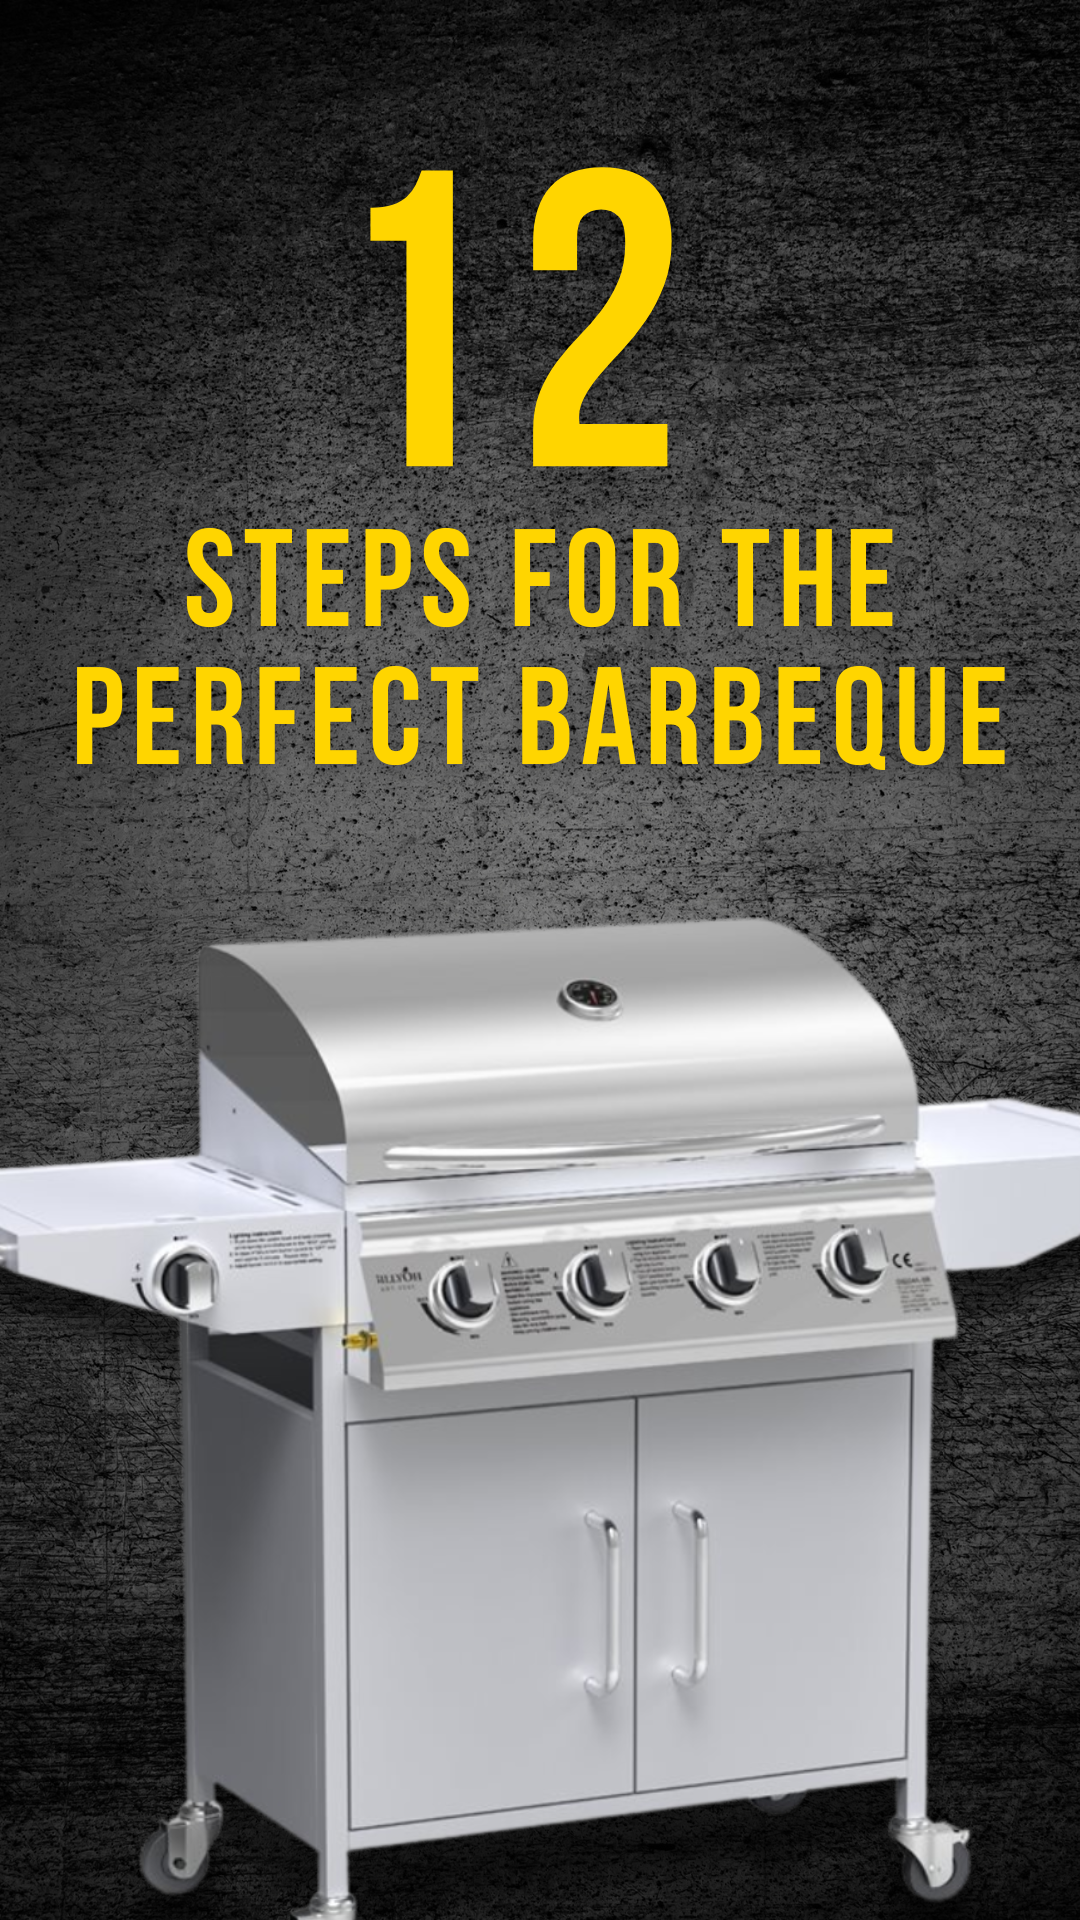 Must Haves For A Perfect BBQ [LIST]